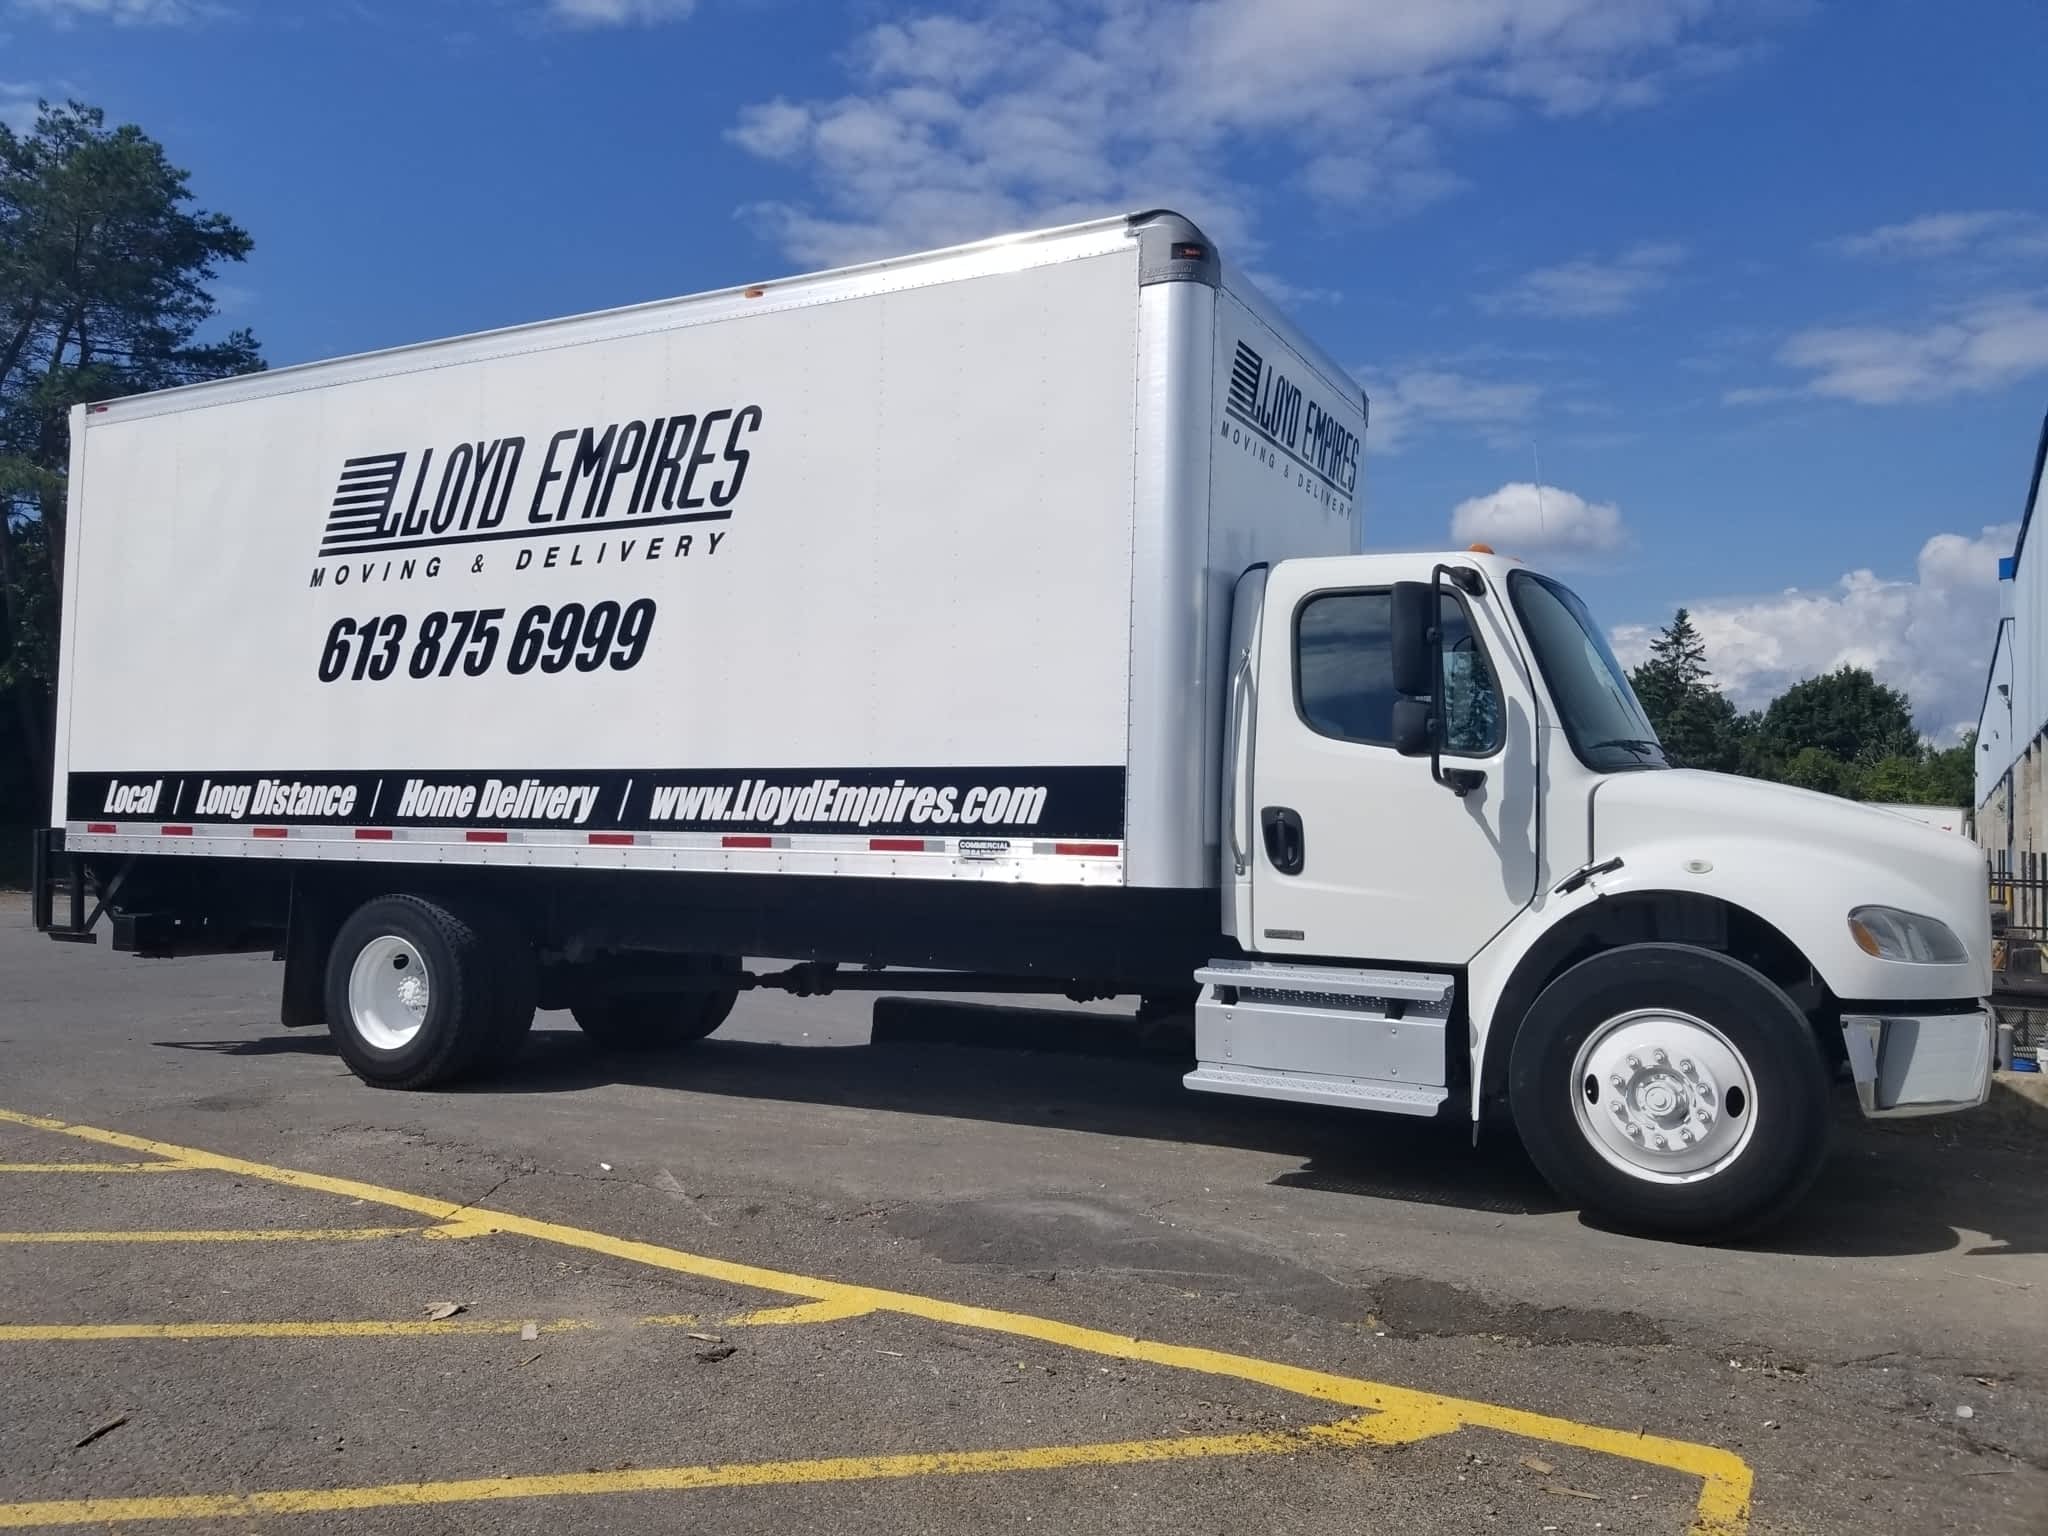 photo Lloyd Empires Moving & Delivery